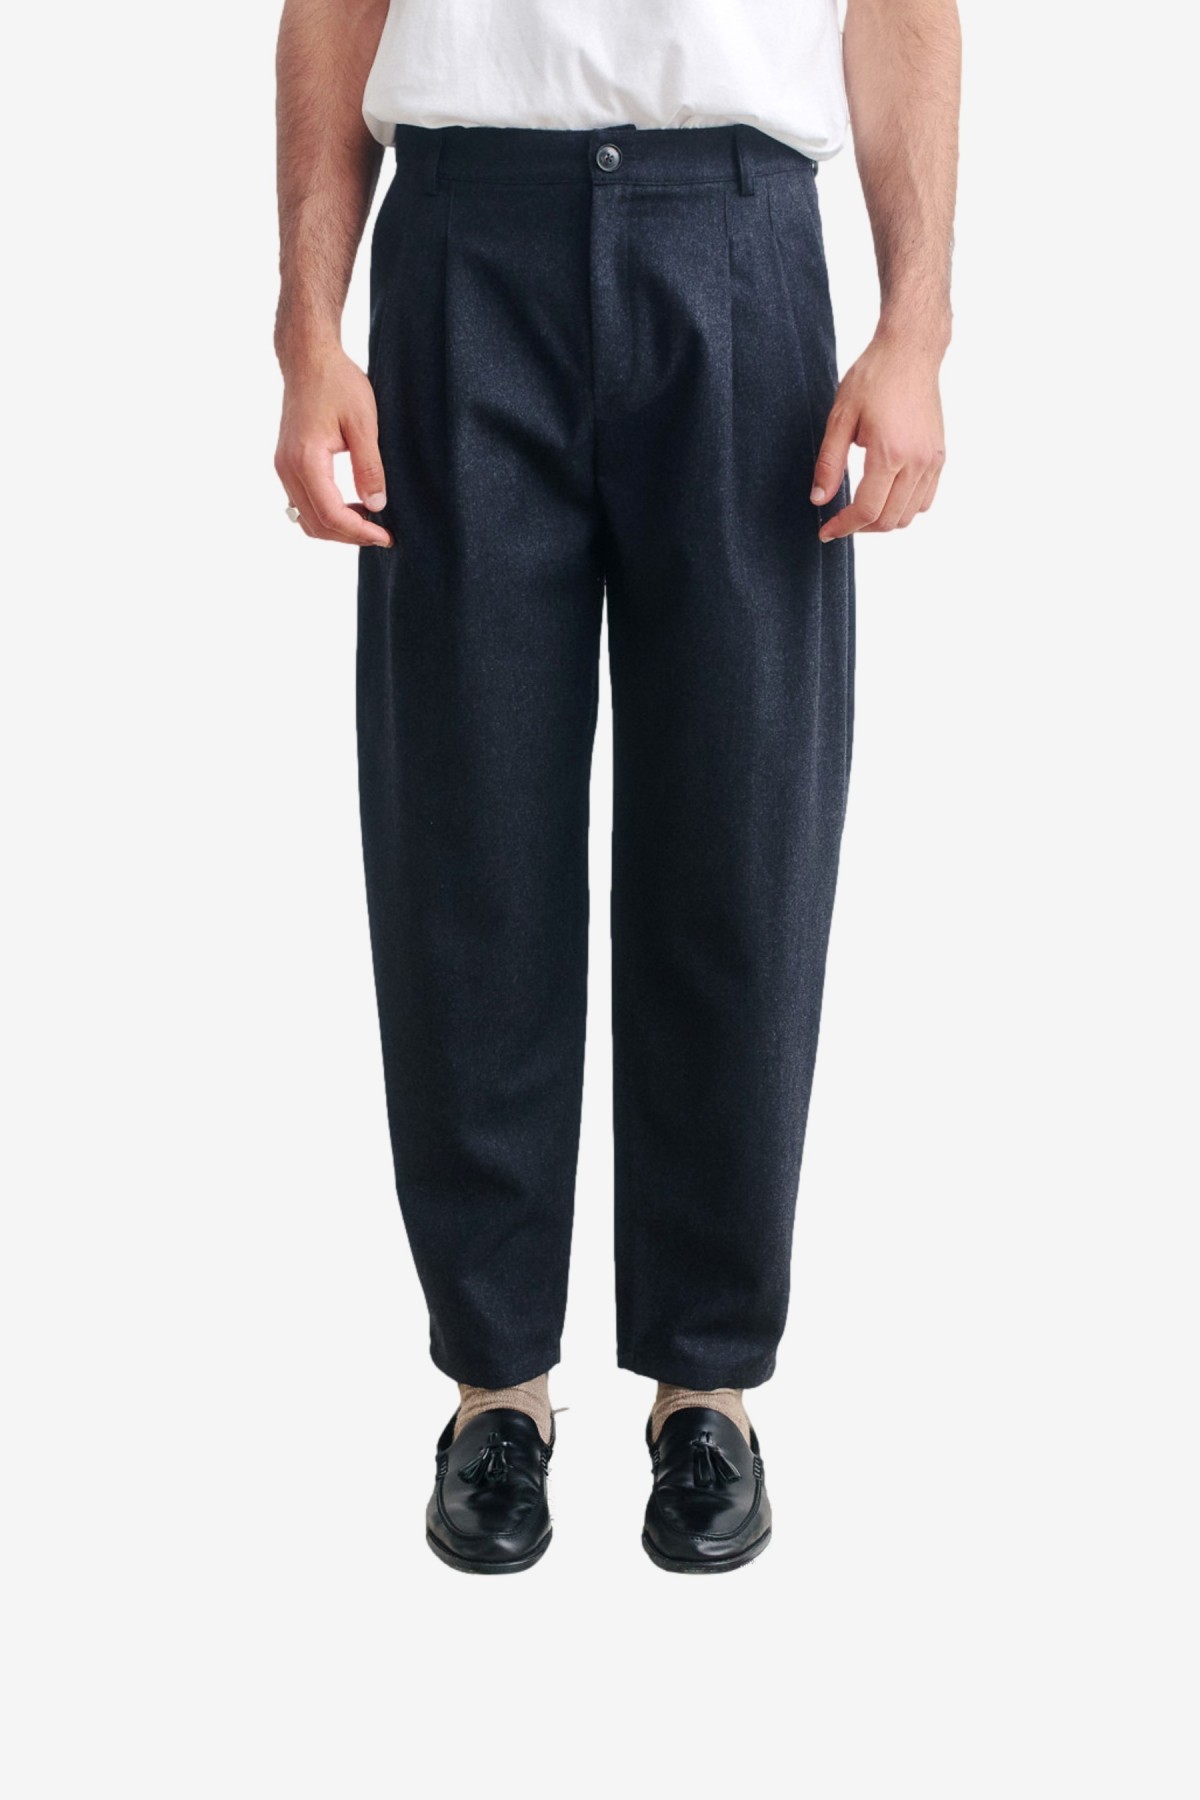 A Kind of Guise Pleated Wide Trousers in Falcon Flannel